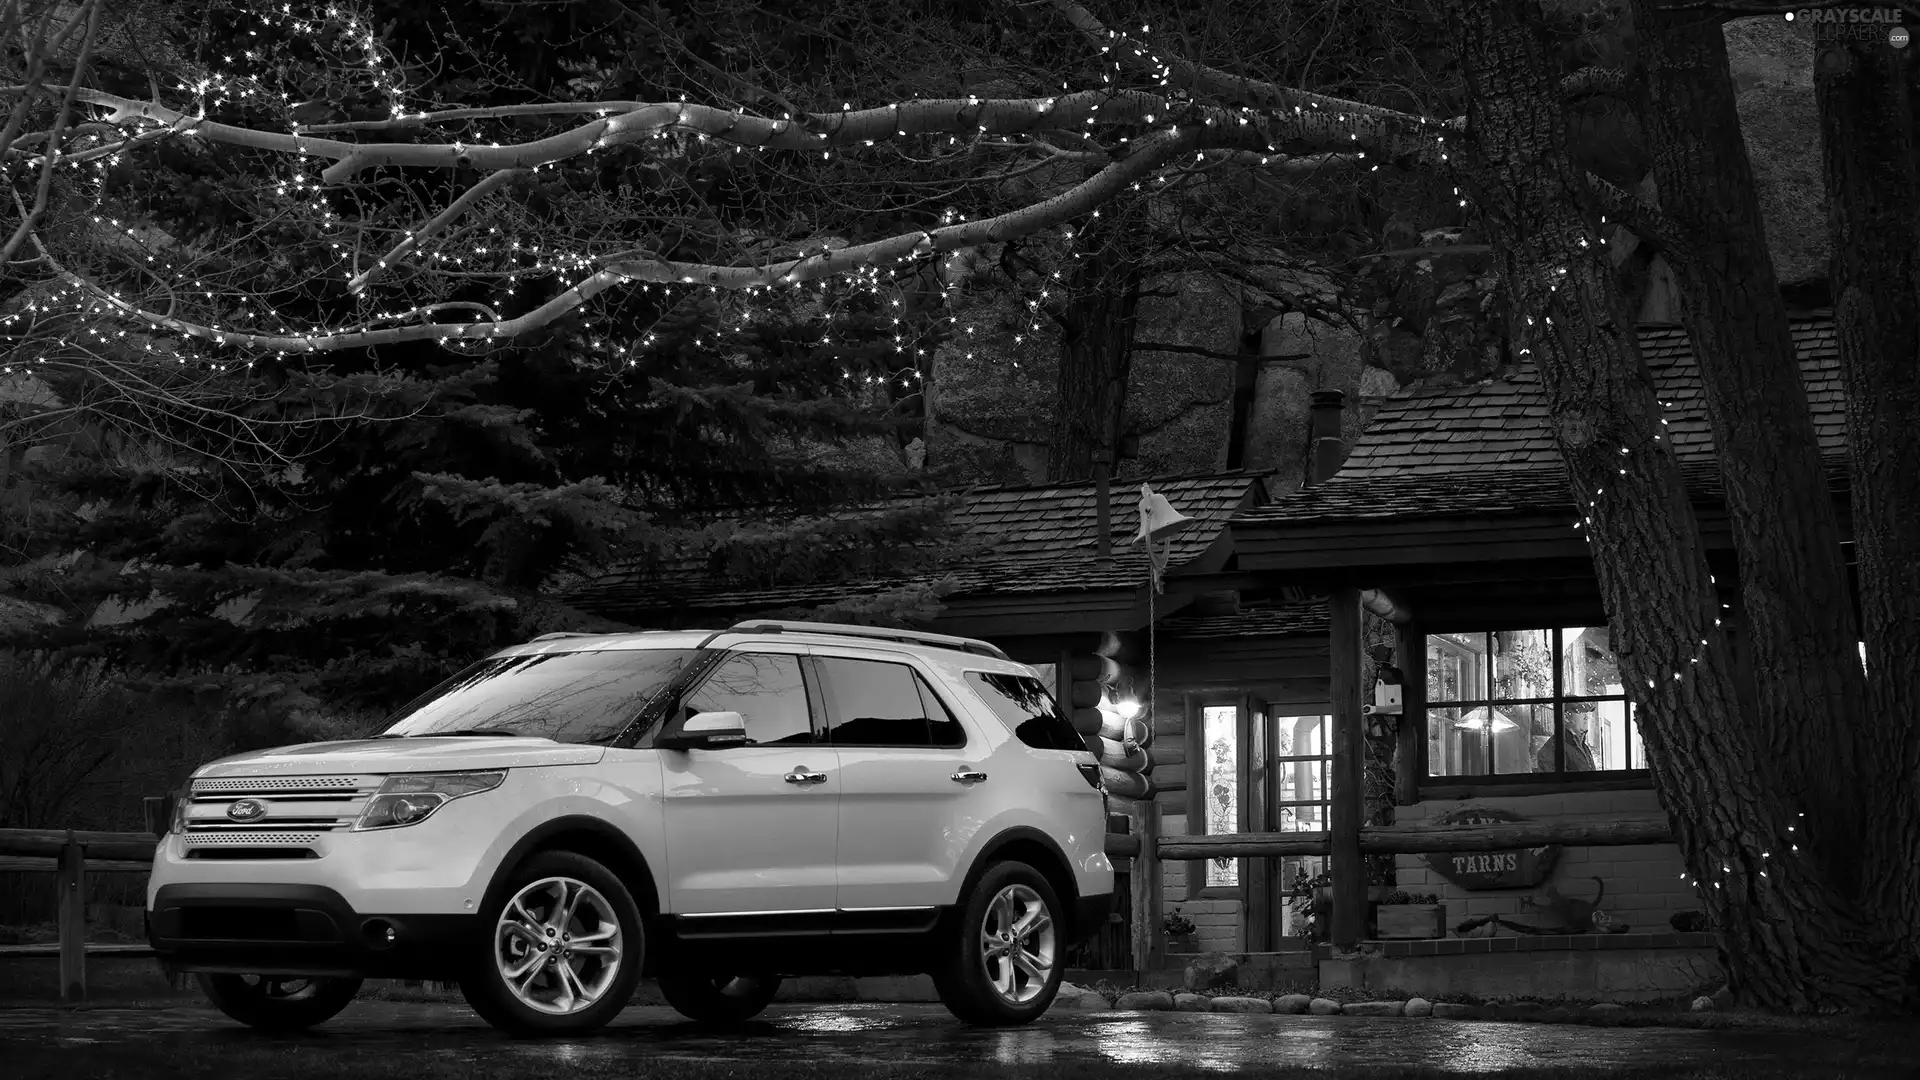 trees, viewes, Explorer, house, Ford